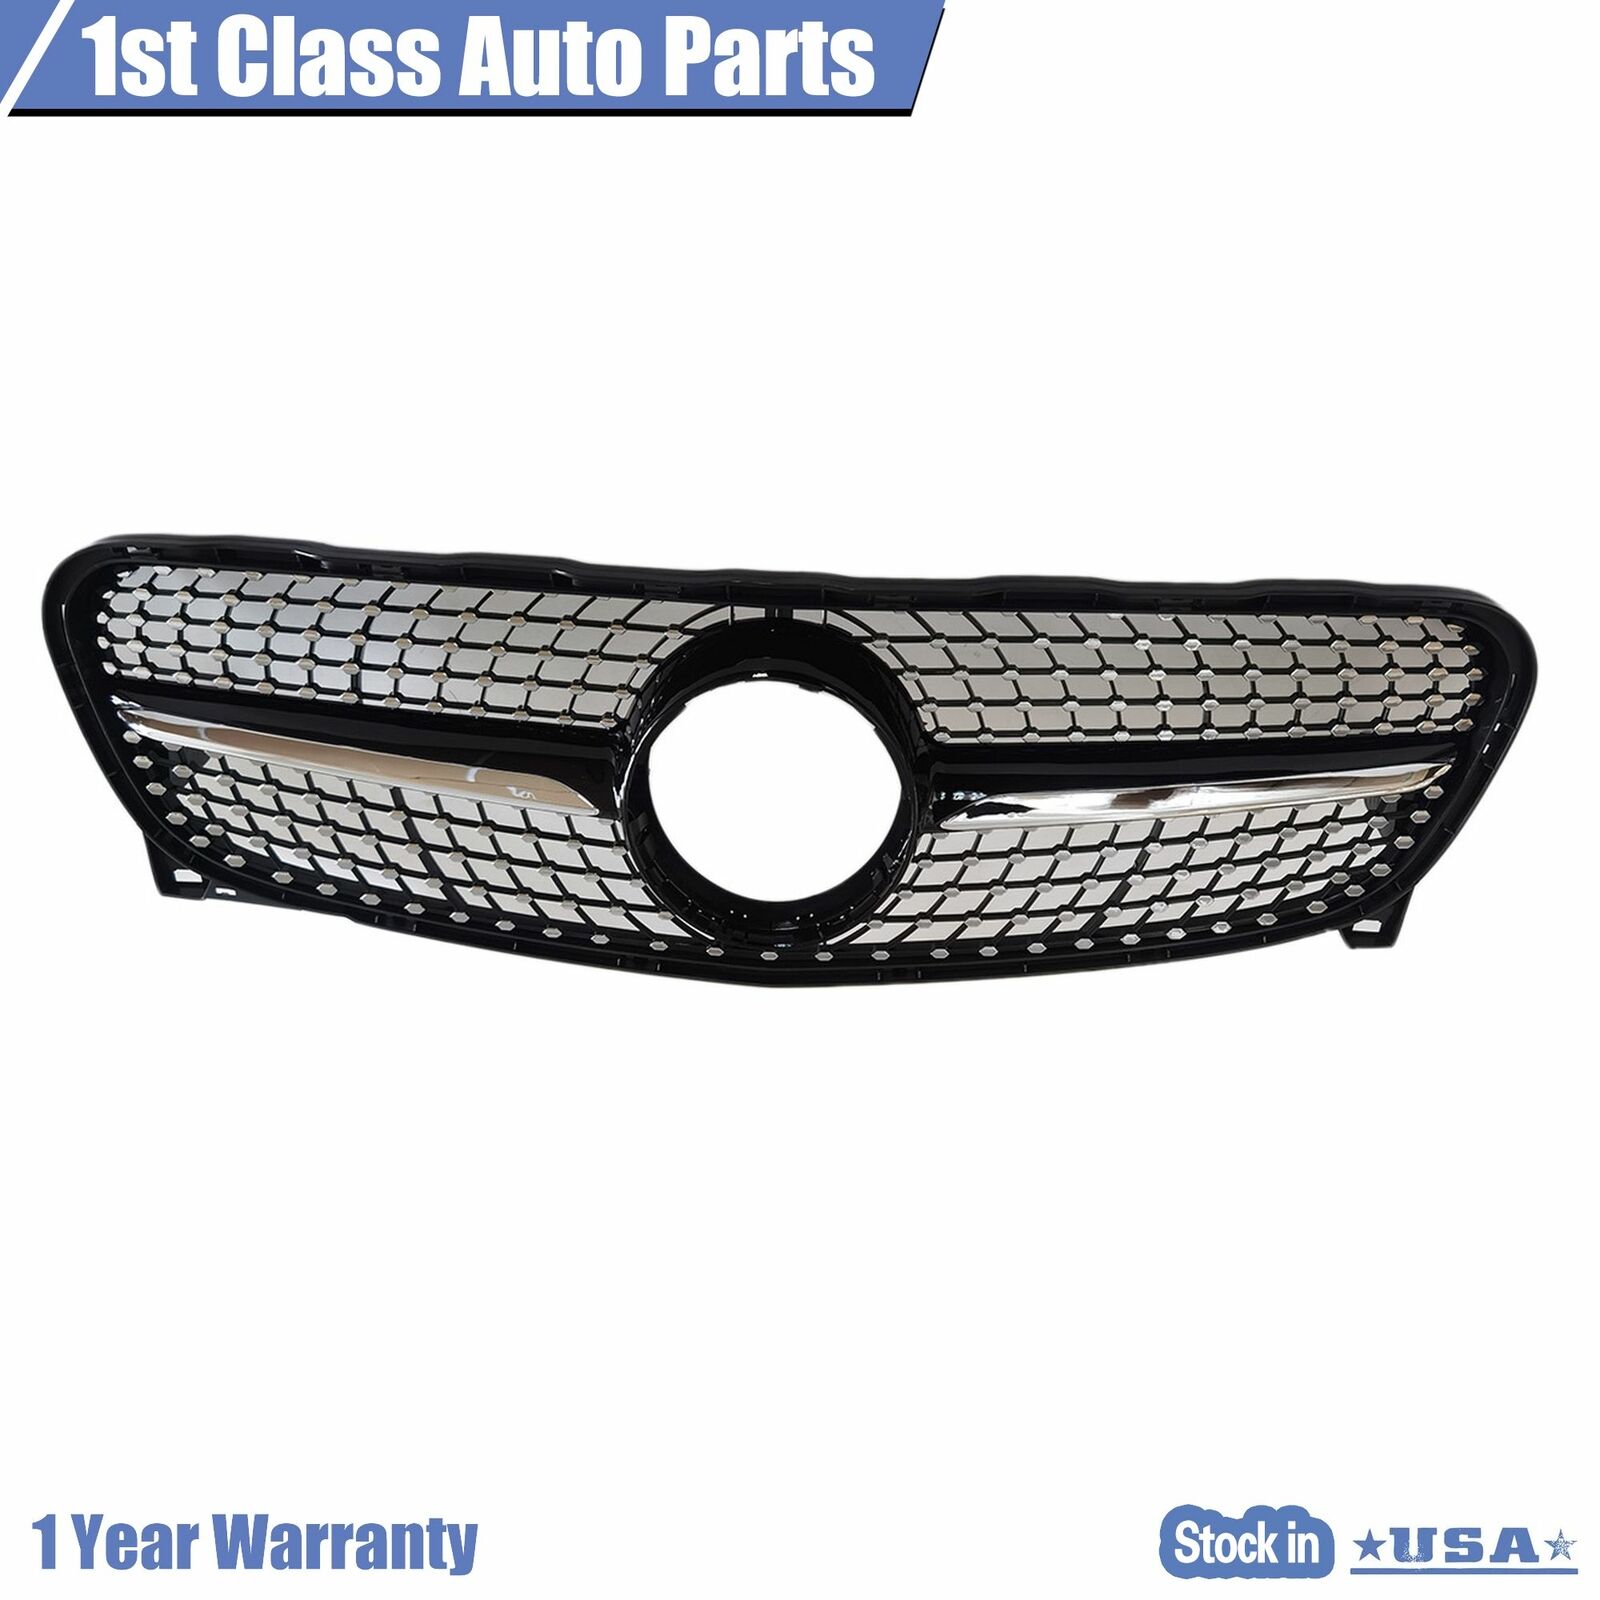 Front Upper Chrome Diamond Style Grille For 2014-2016 Mercedes GLA200 250 45 AMG